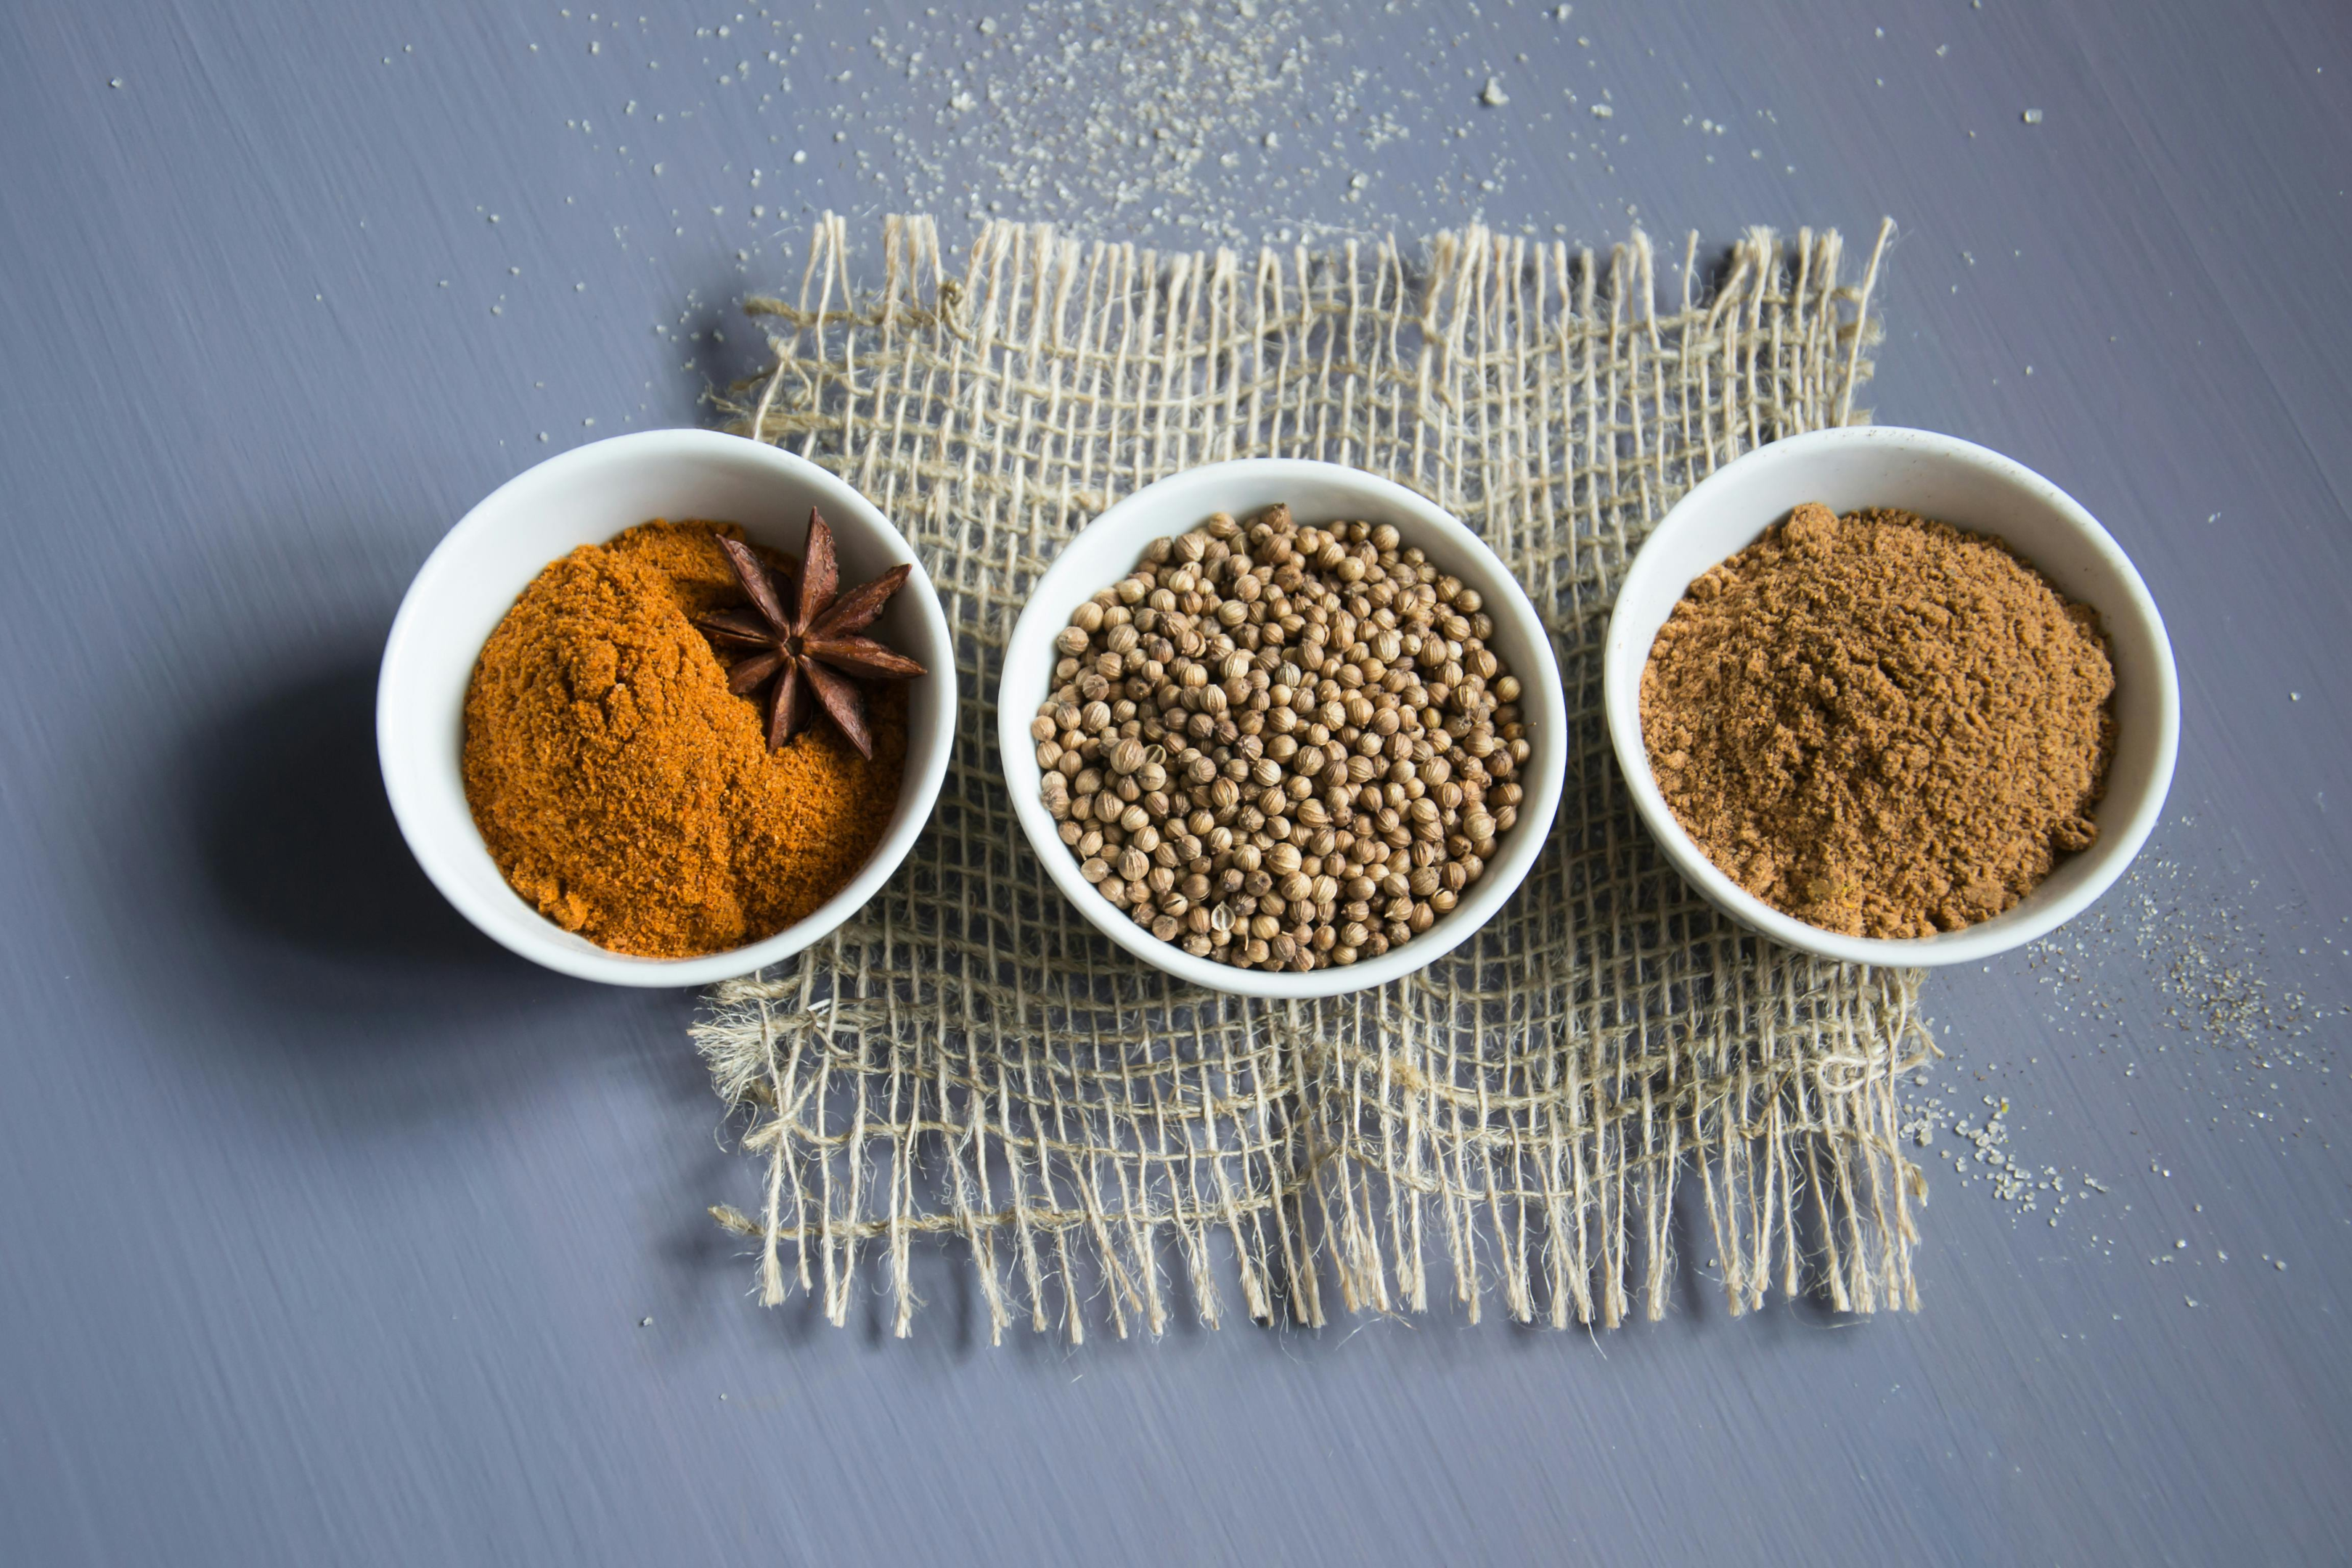 Various spice blends in colorful packaging